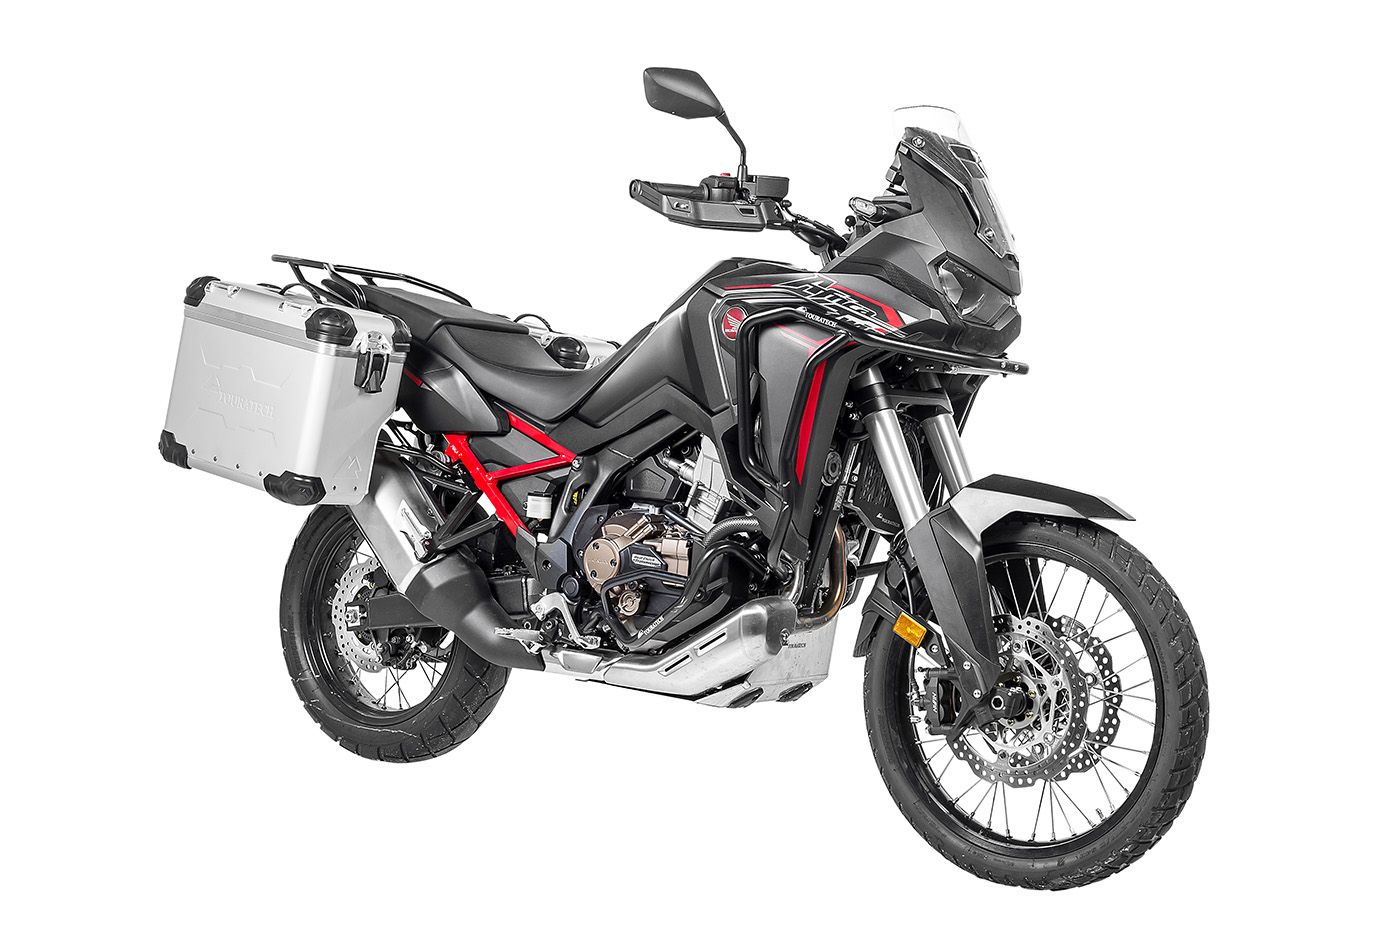 ZEGA Evo X special system 38/38L С/ե졼֥åfor CRF1100L Africa Twin-2021